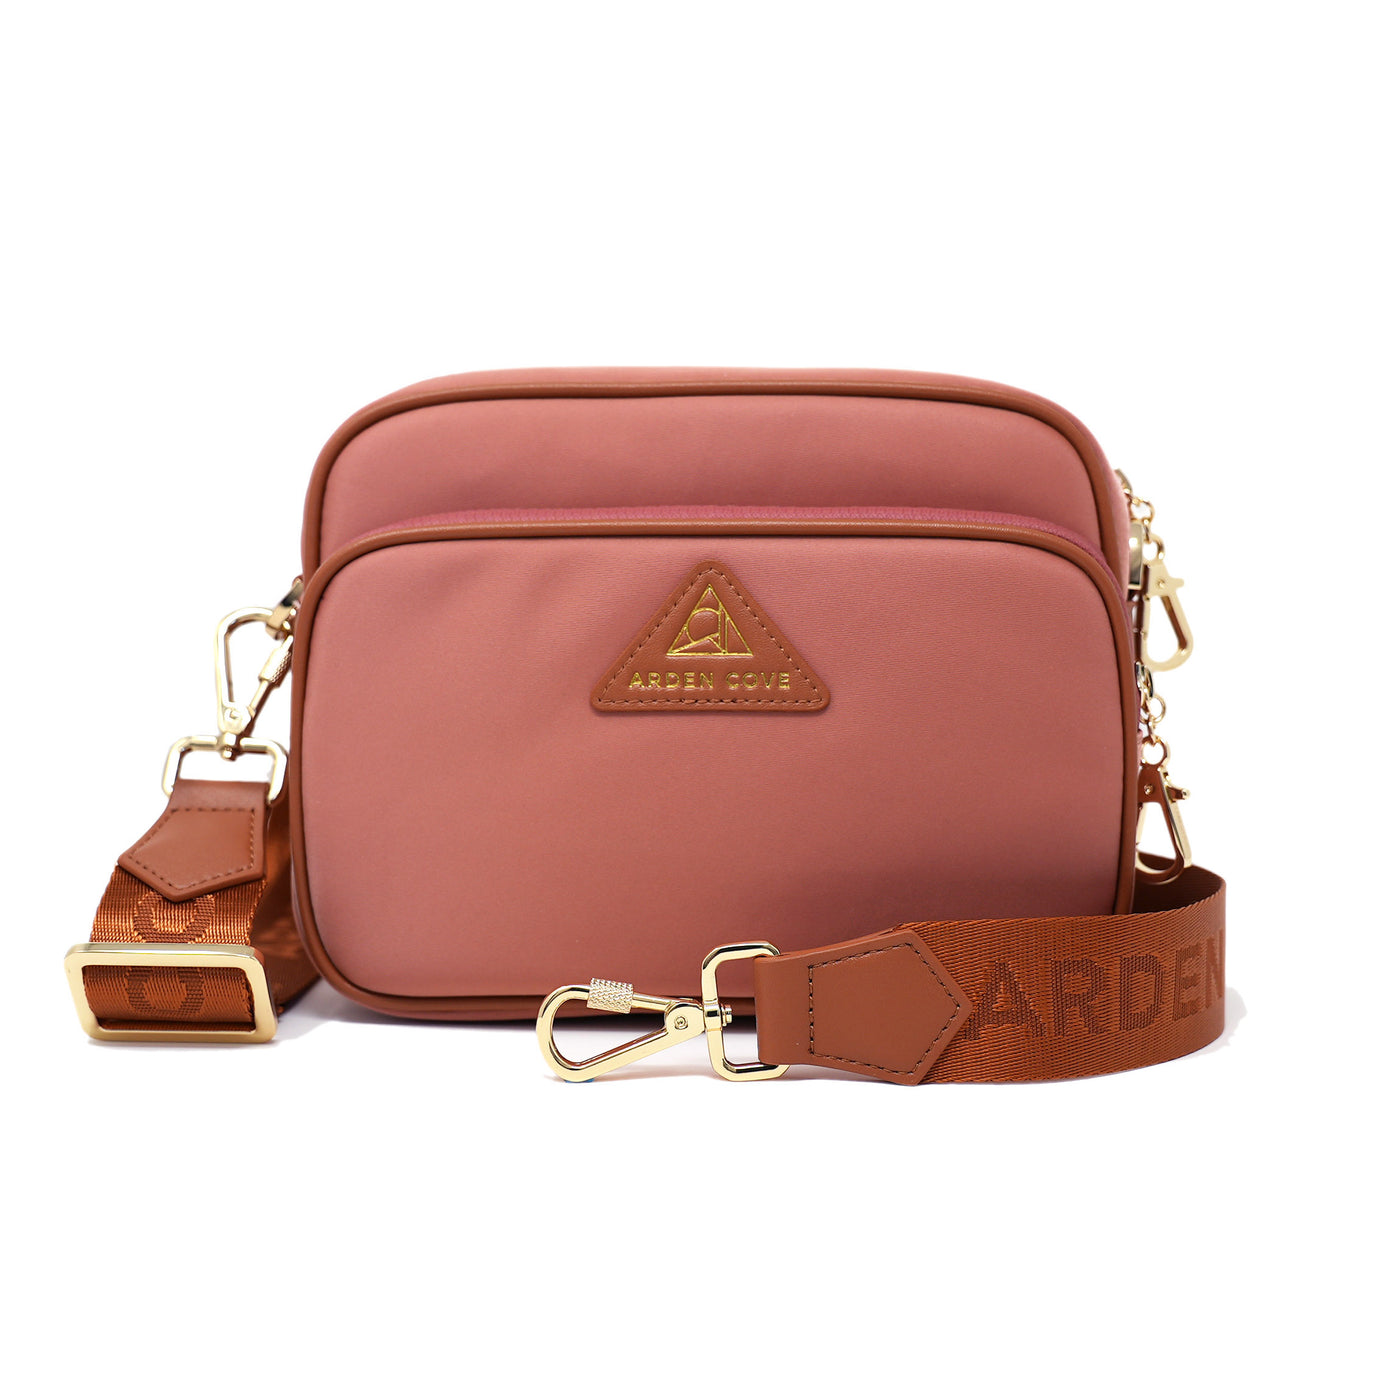 Anti-theft Water-resistant Travel Crossbody - Crissy Full Crossbody in Dusty Pink Gold with nylon jacquard locking clasps straps - front view - Arden Cove